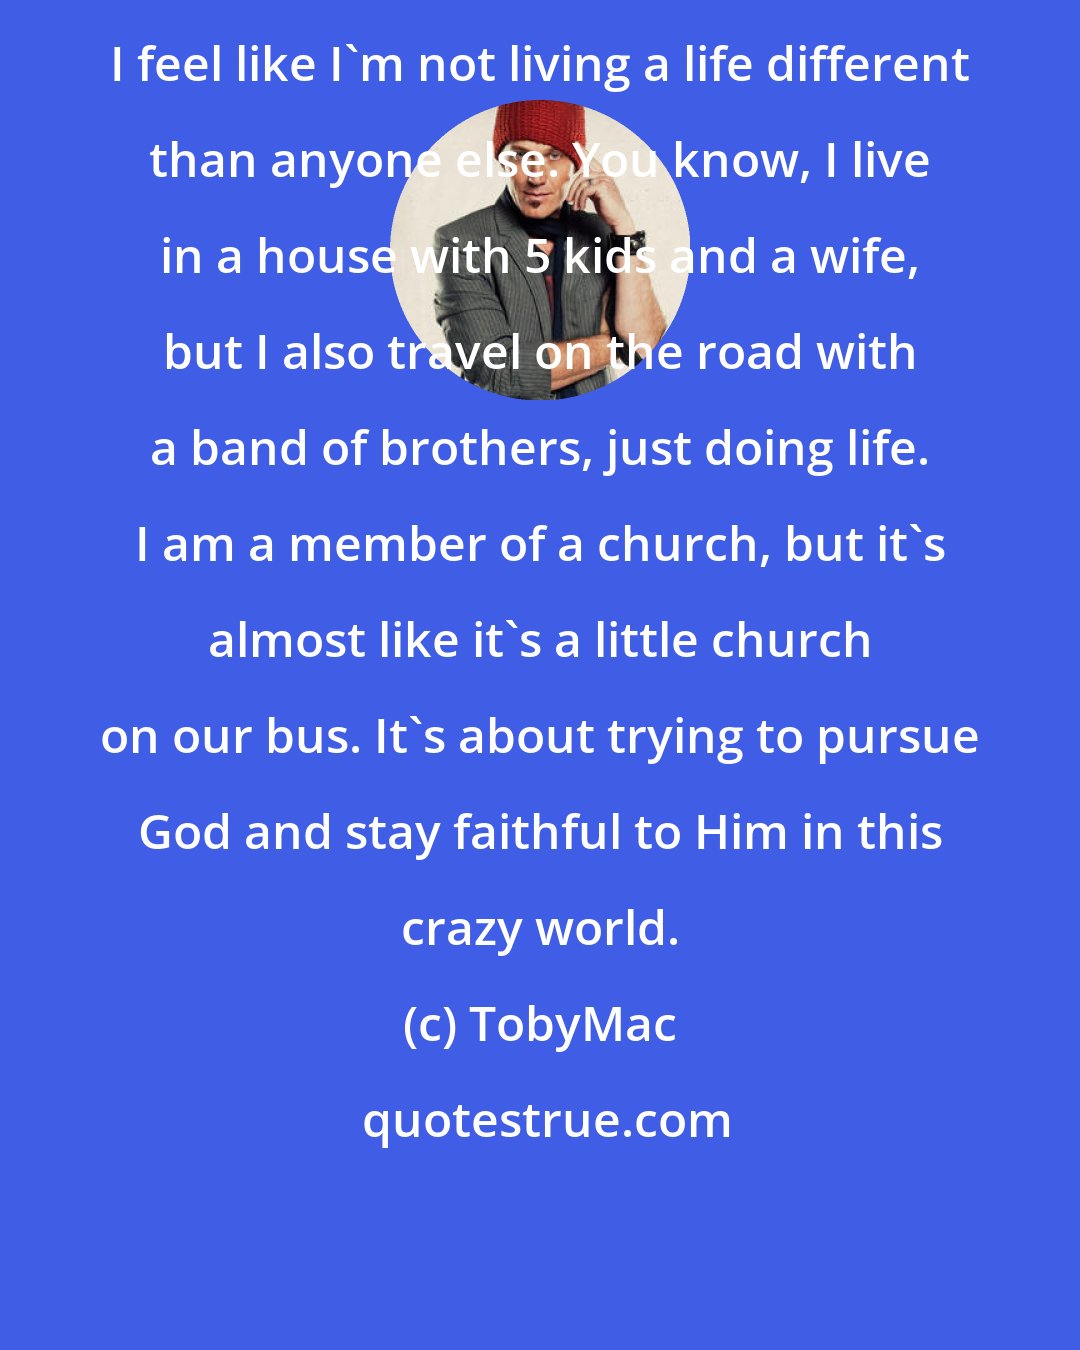 TobyMac: I feel like I'm not living a life different than anyone else. You know, I live in a house with 5 kids and a wife, but I also travel on the road with a band of brothers, just doing life. I am a member of a church, but it's almost like it's a little church on our bus. It's about trying to pursue God and stay faithful to Him in this crazy world.